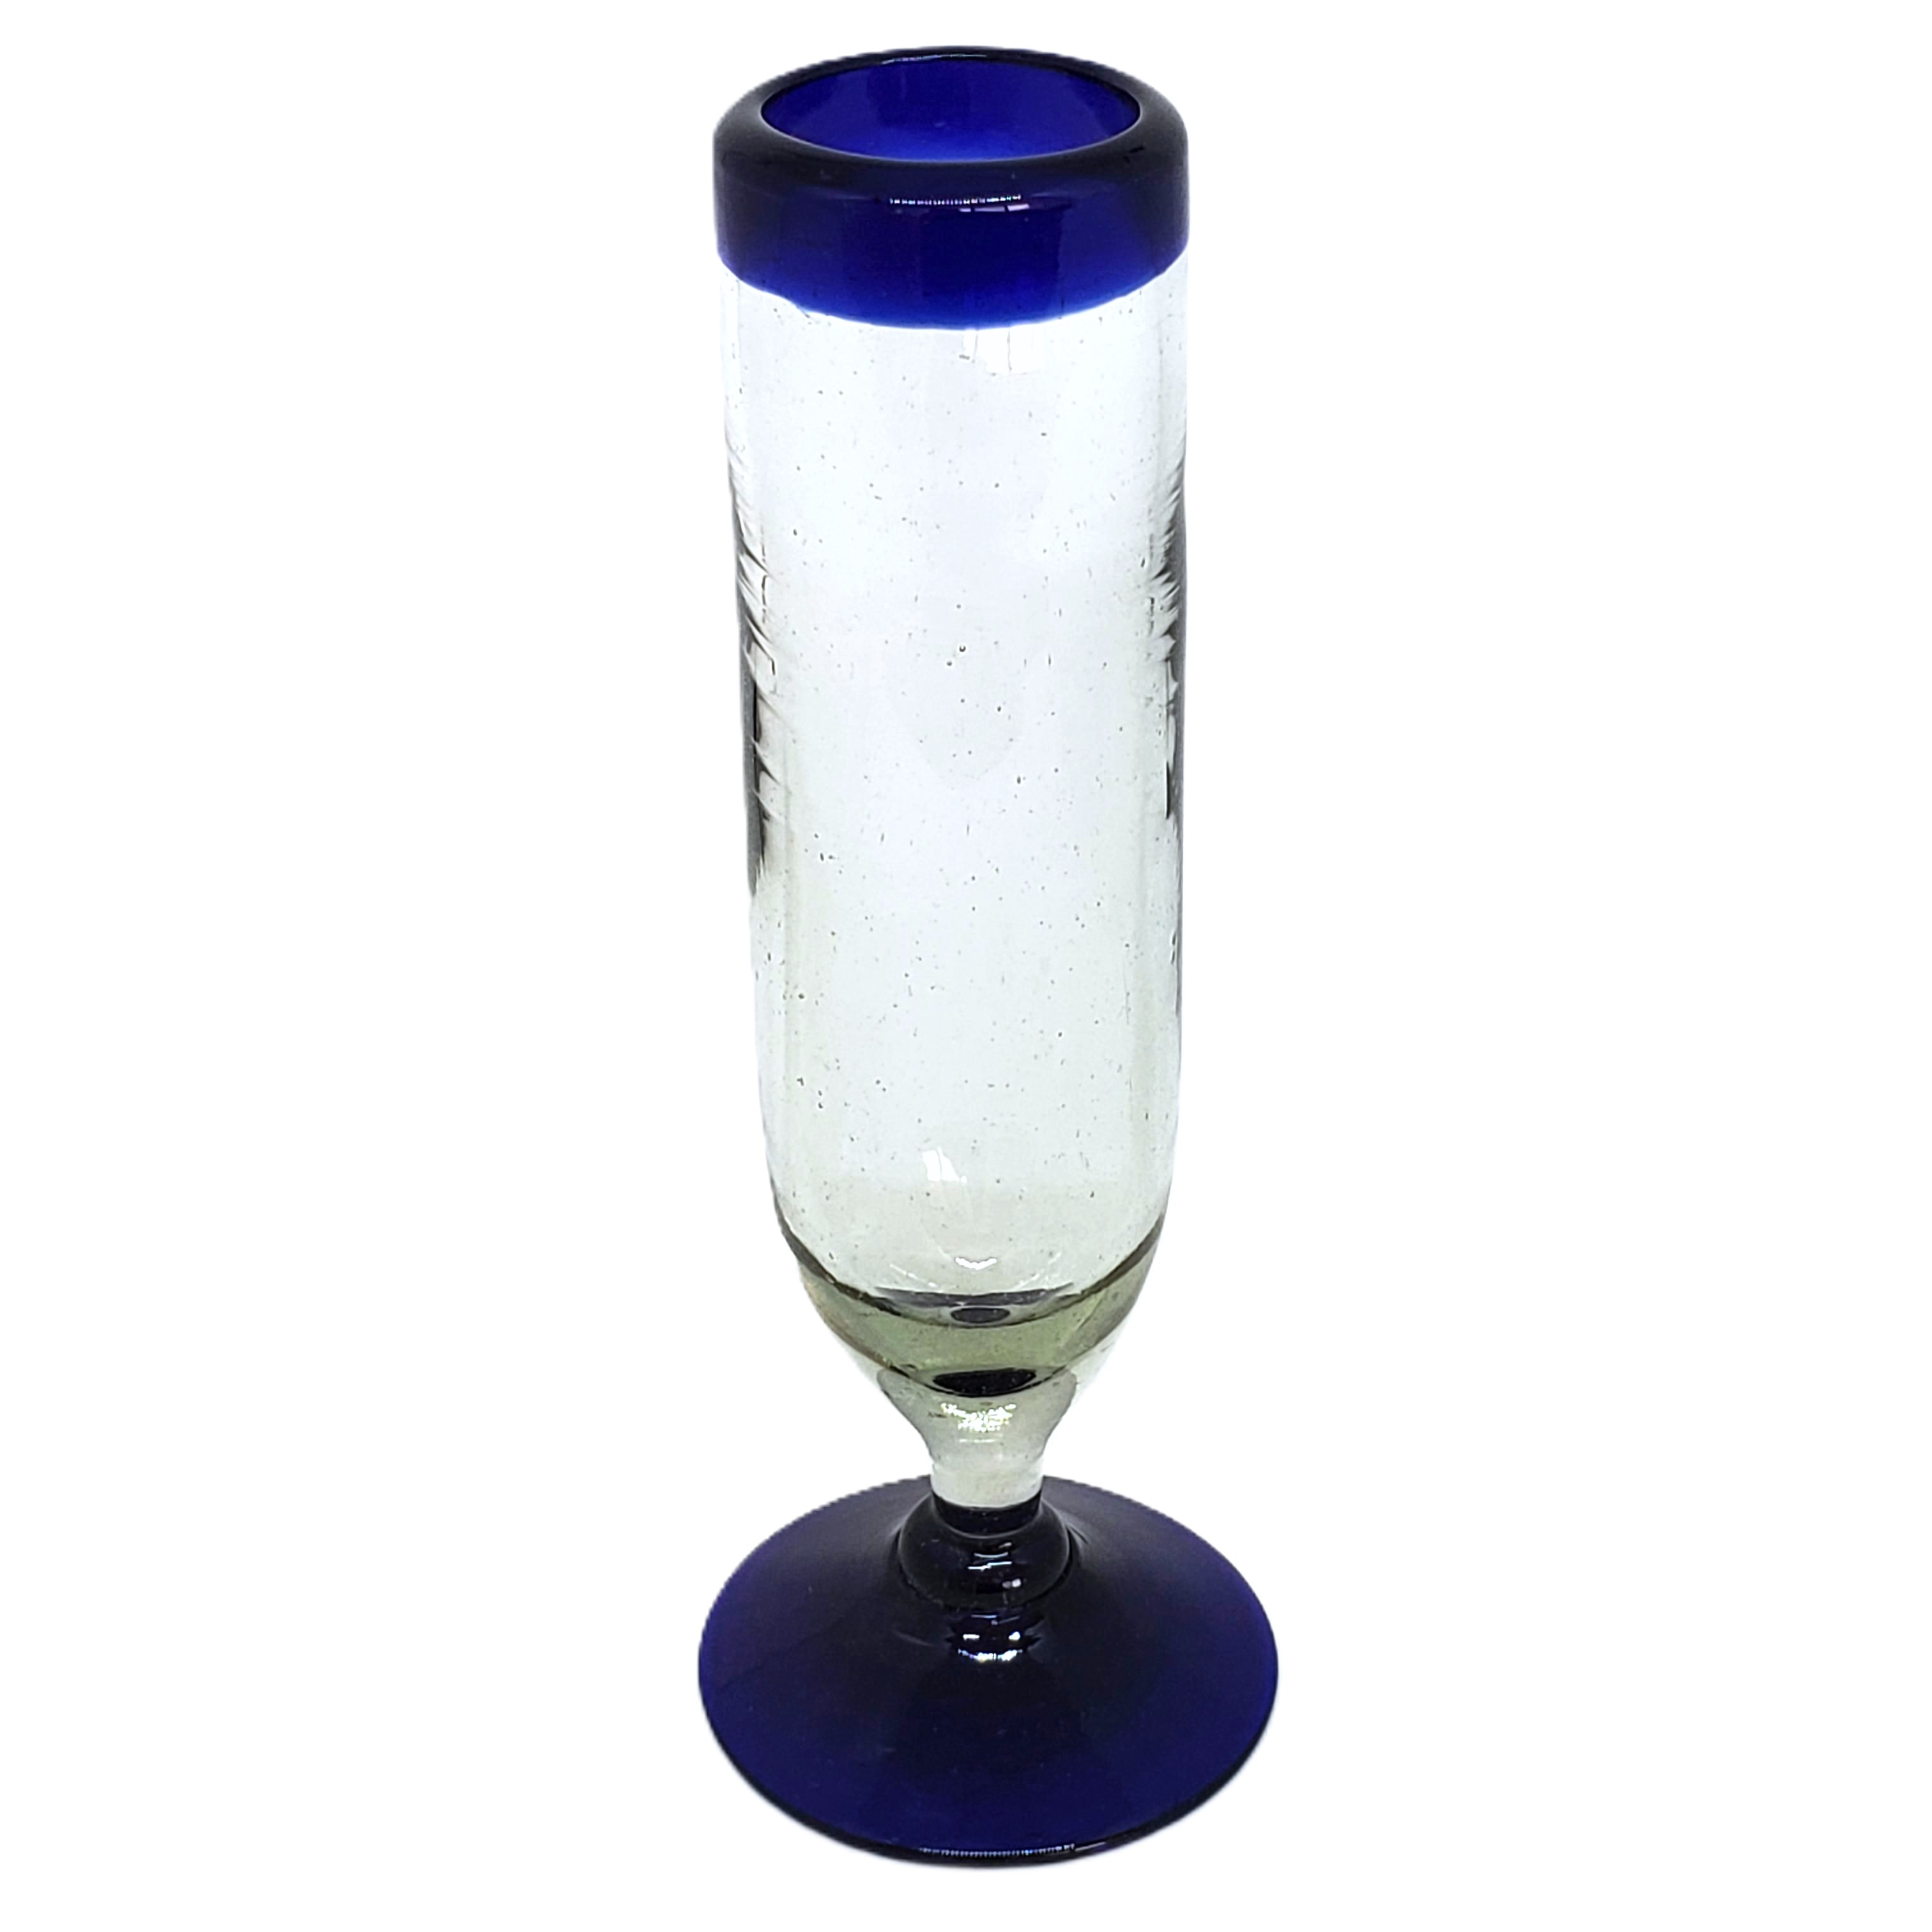 Wholesale Cobalt Blue Rim Glassware / Cobalt Blue Rim 6 oz Champagne Flutes  / Beautifully crafted champagne flutes for important celebrations!, enjoy toasting with your favorite champagne or sparkling wine in stylish fashion!